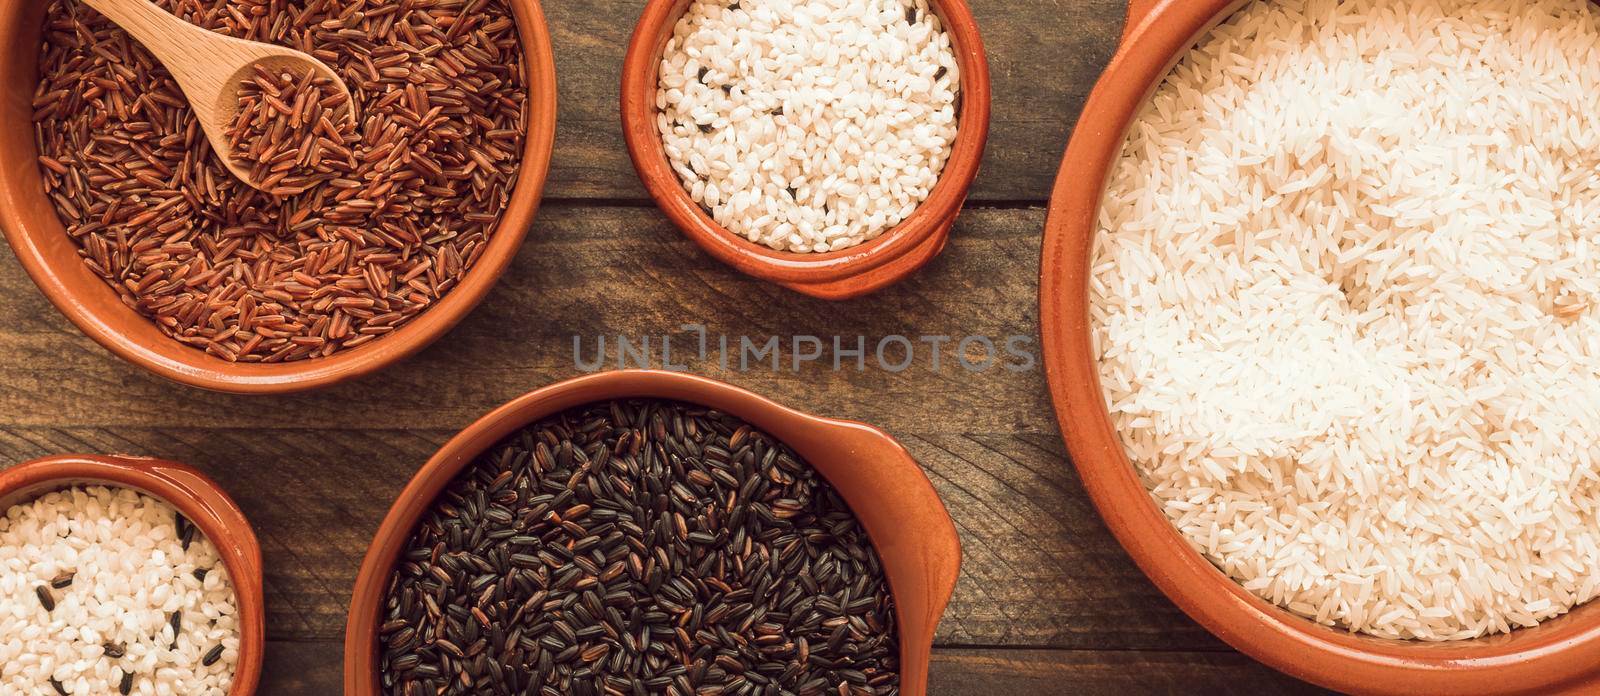 red brown white rice bowls wooden background. High quality photo by Zahard